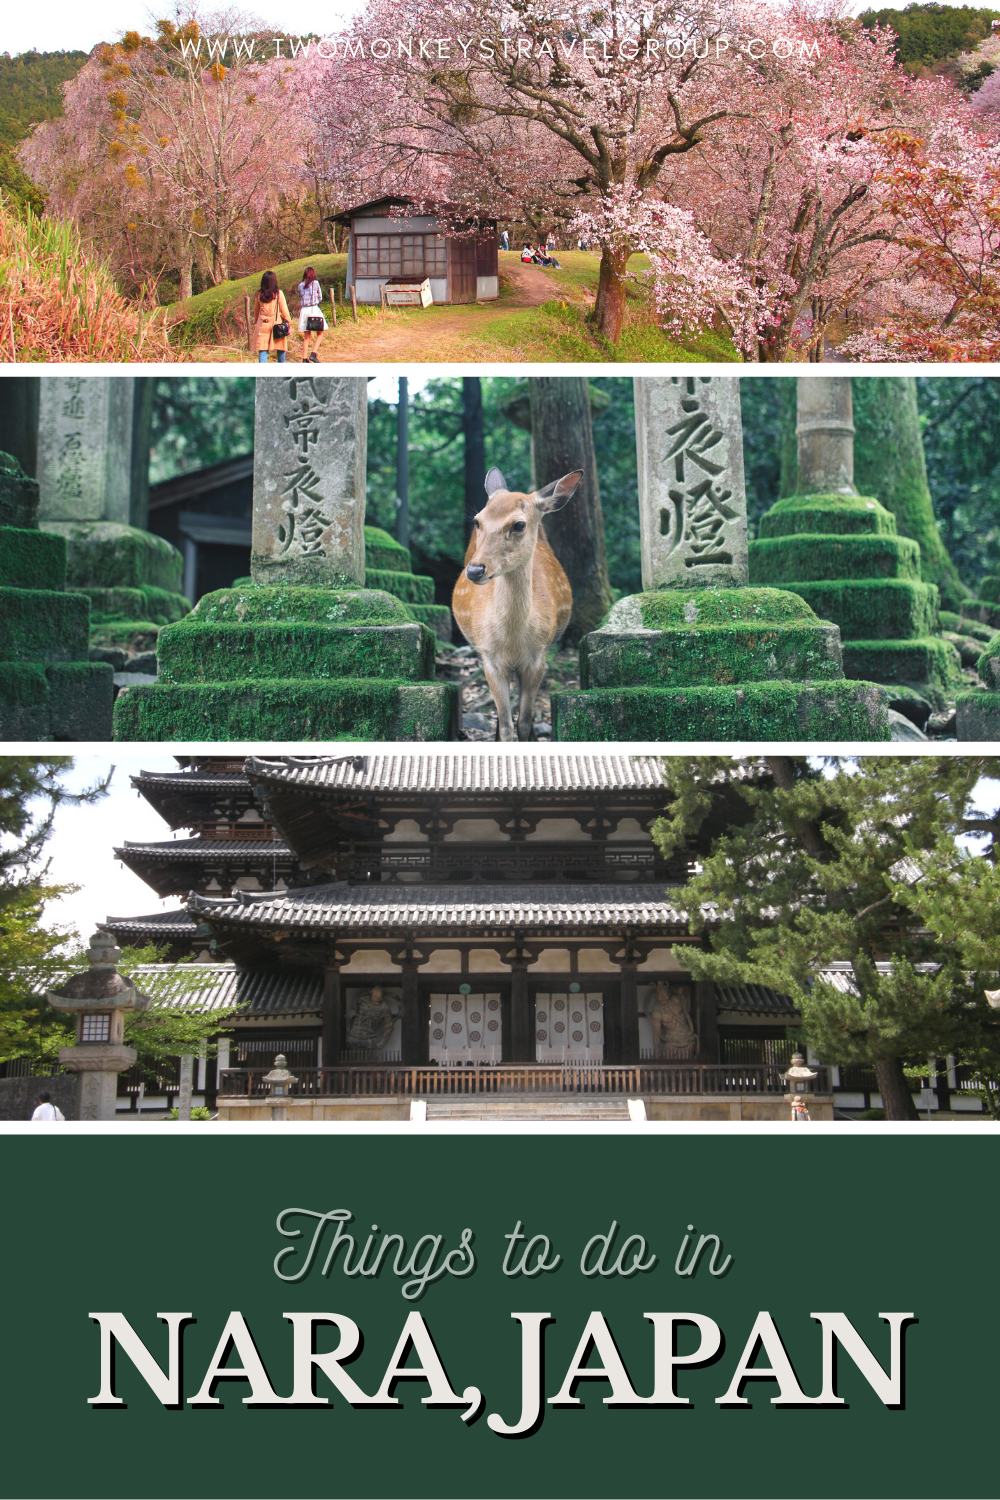 5 Things To Do in Nara, Japan [With Suggested Tours]